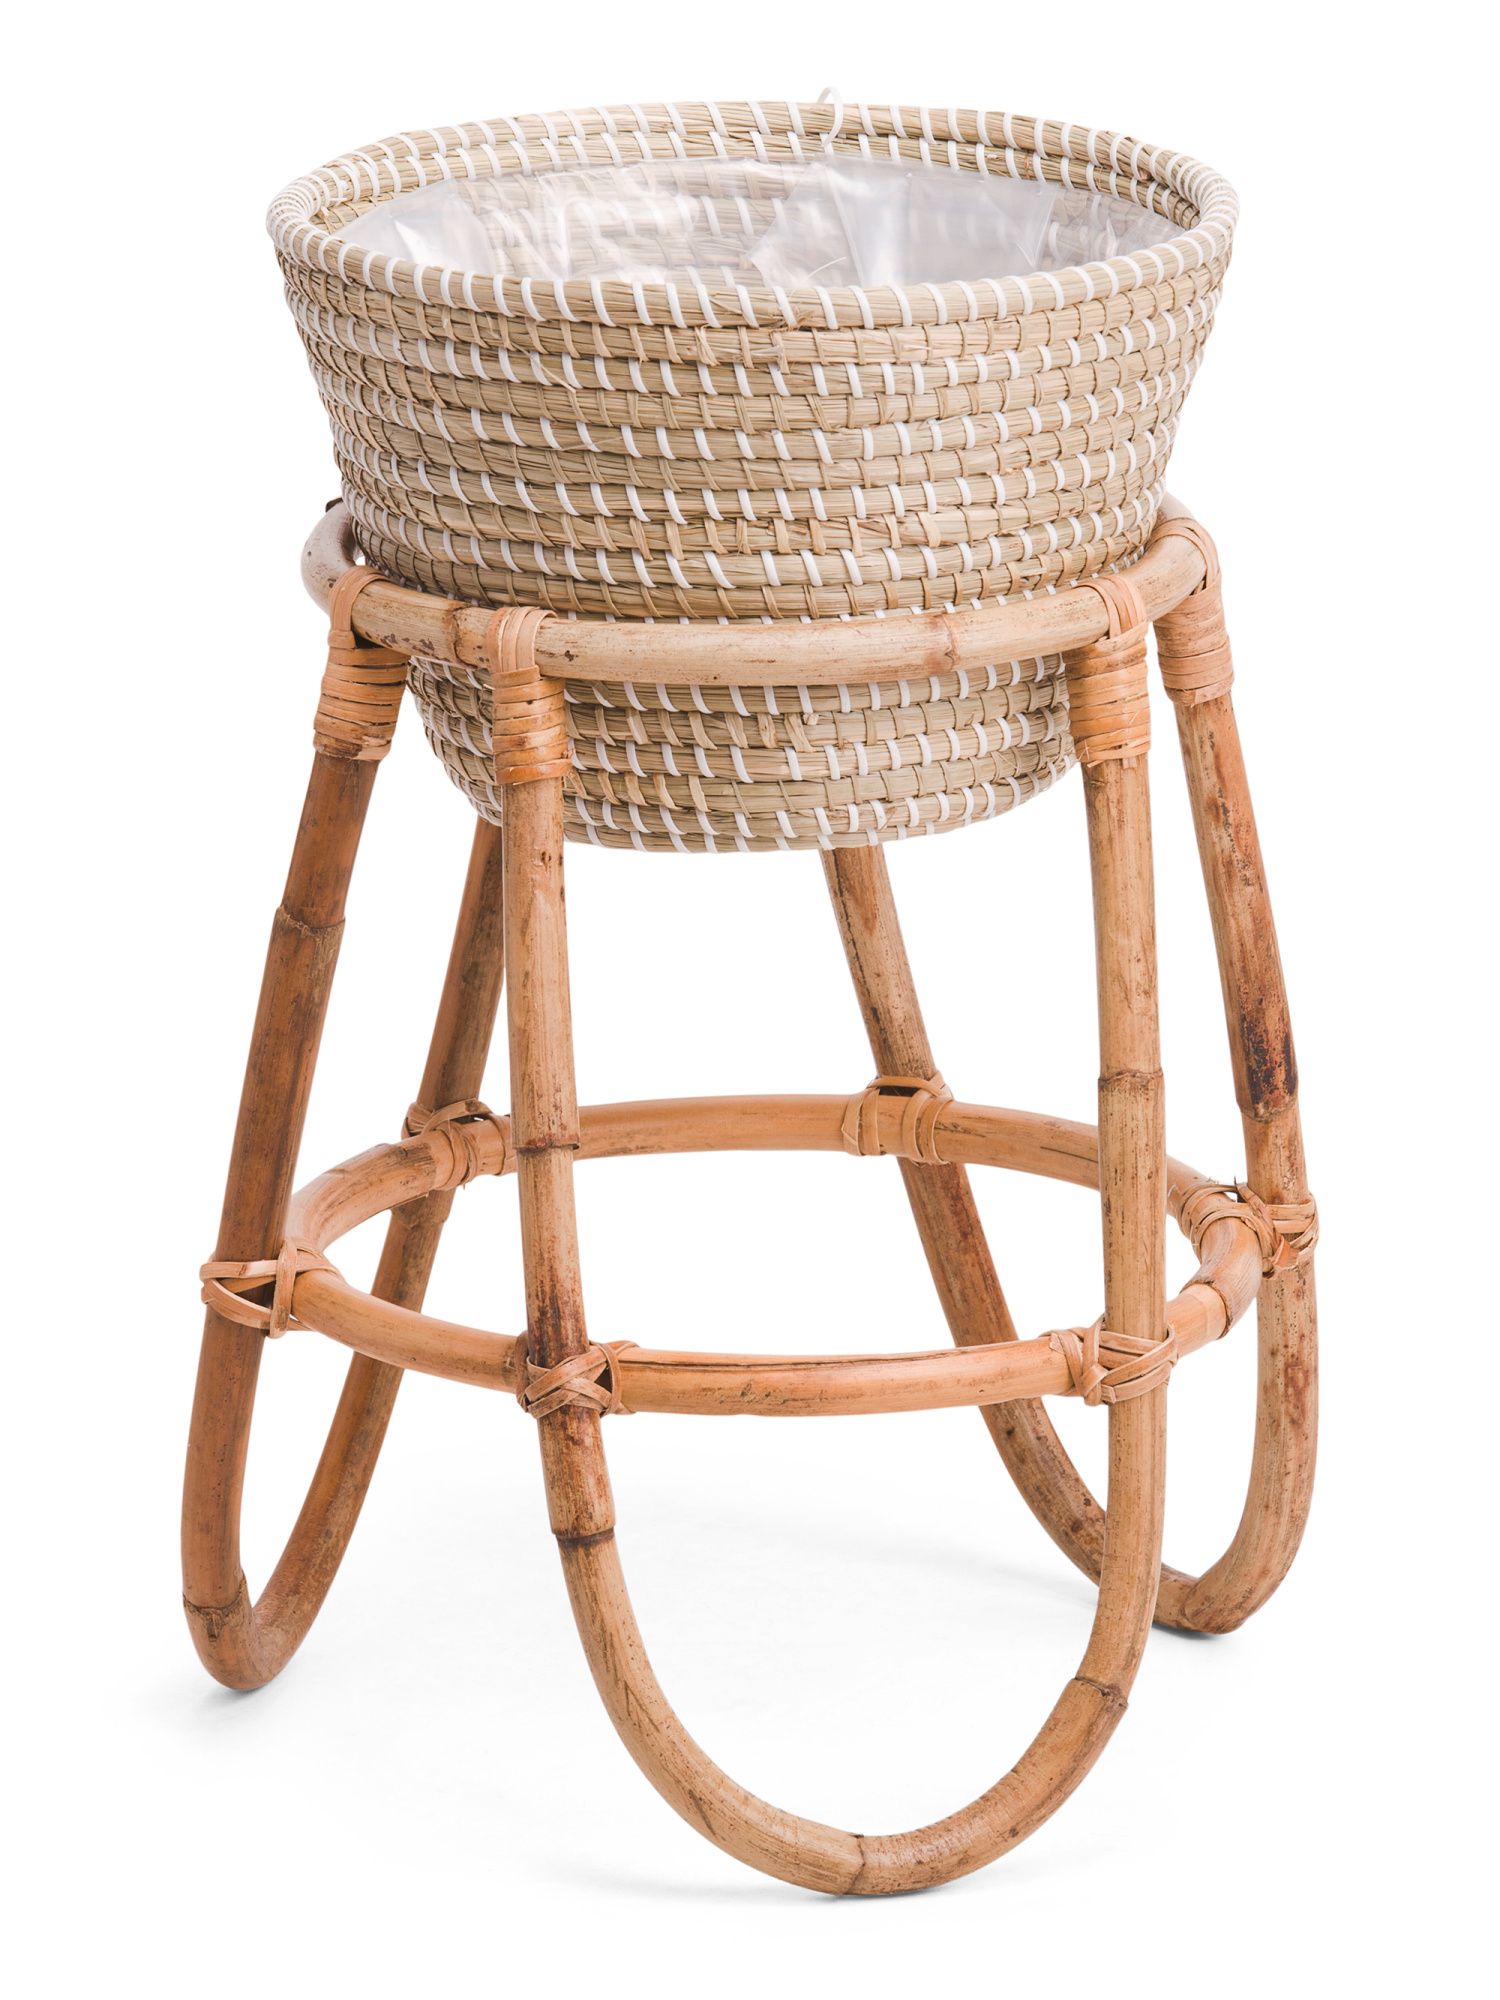 Seagrass Basket With Rattan Stand | TJ Maxx